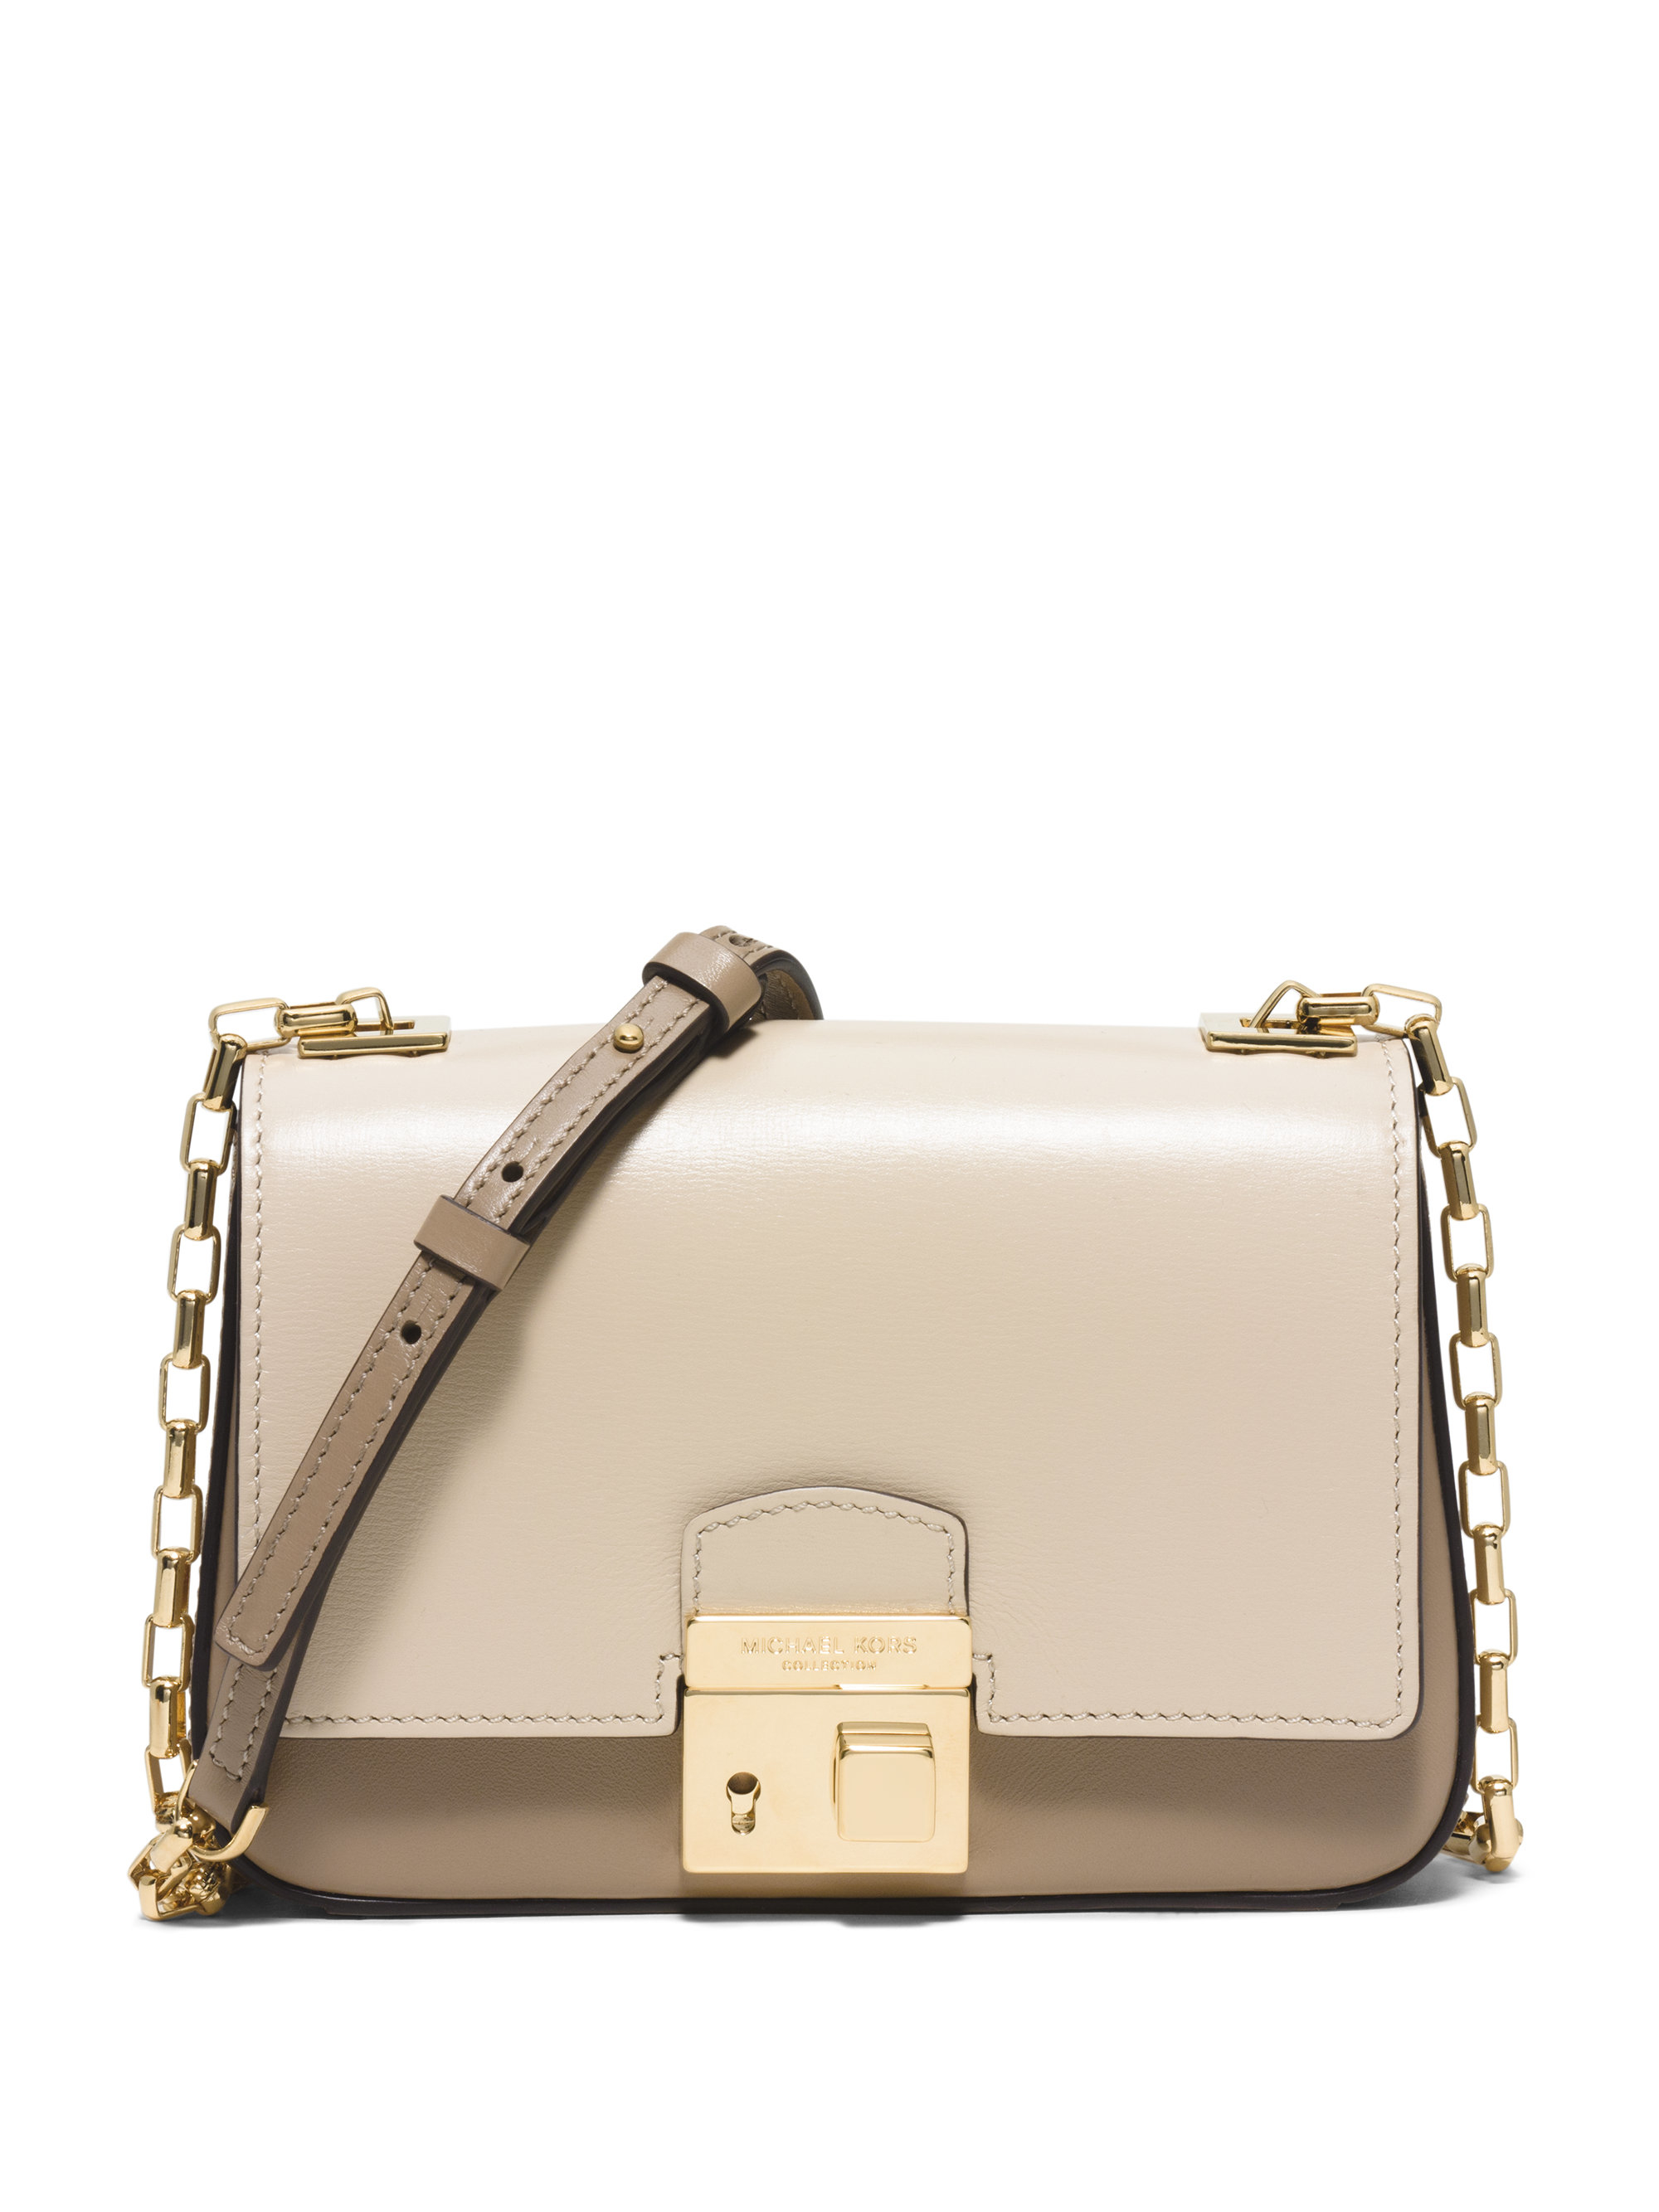 Lyst - Michael Kors Gia Small Leather Shoulder Bag in Natural